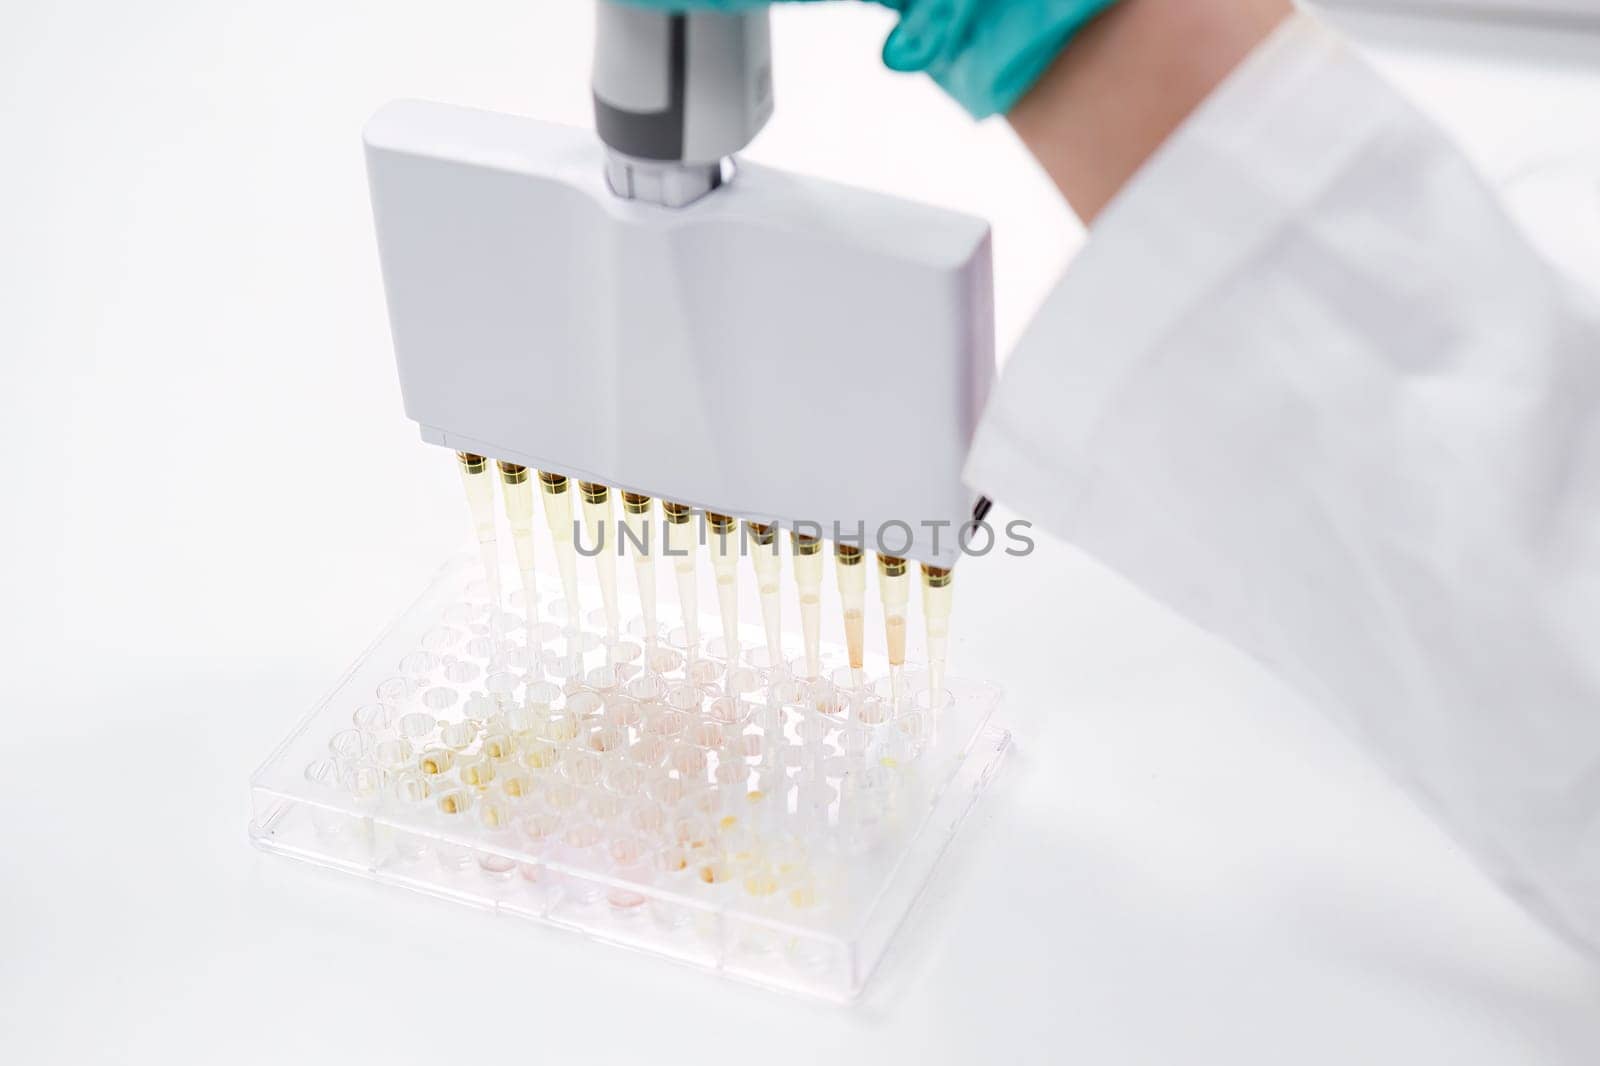 A multichannel pipette dispenser is used to load microplates for clinical diagnostic testing.